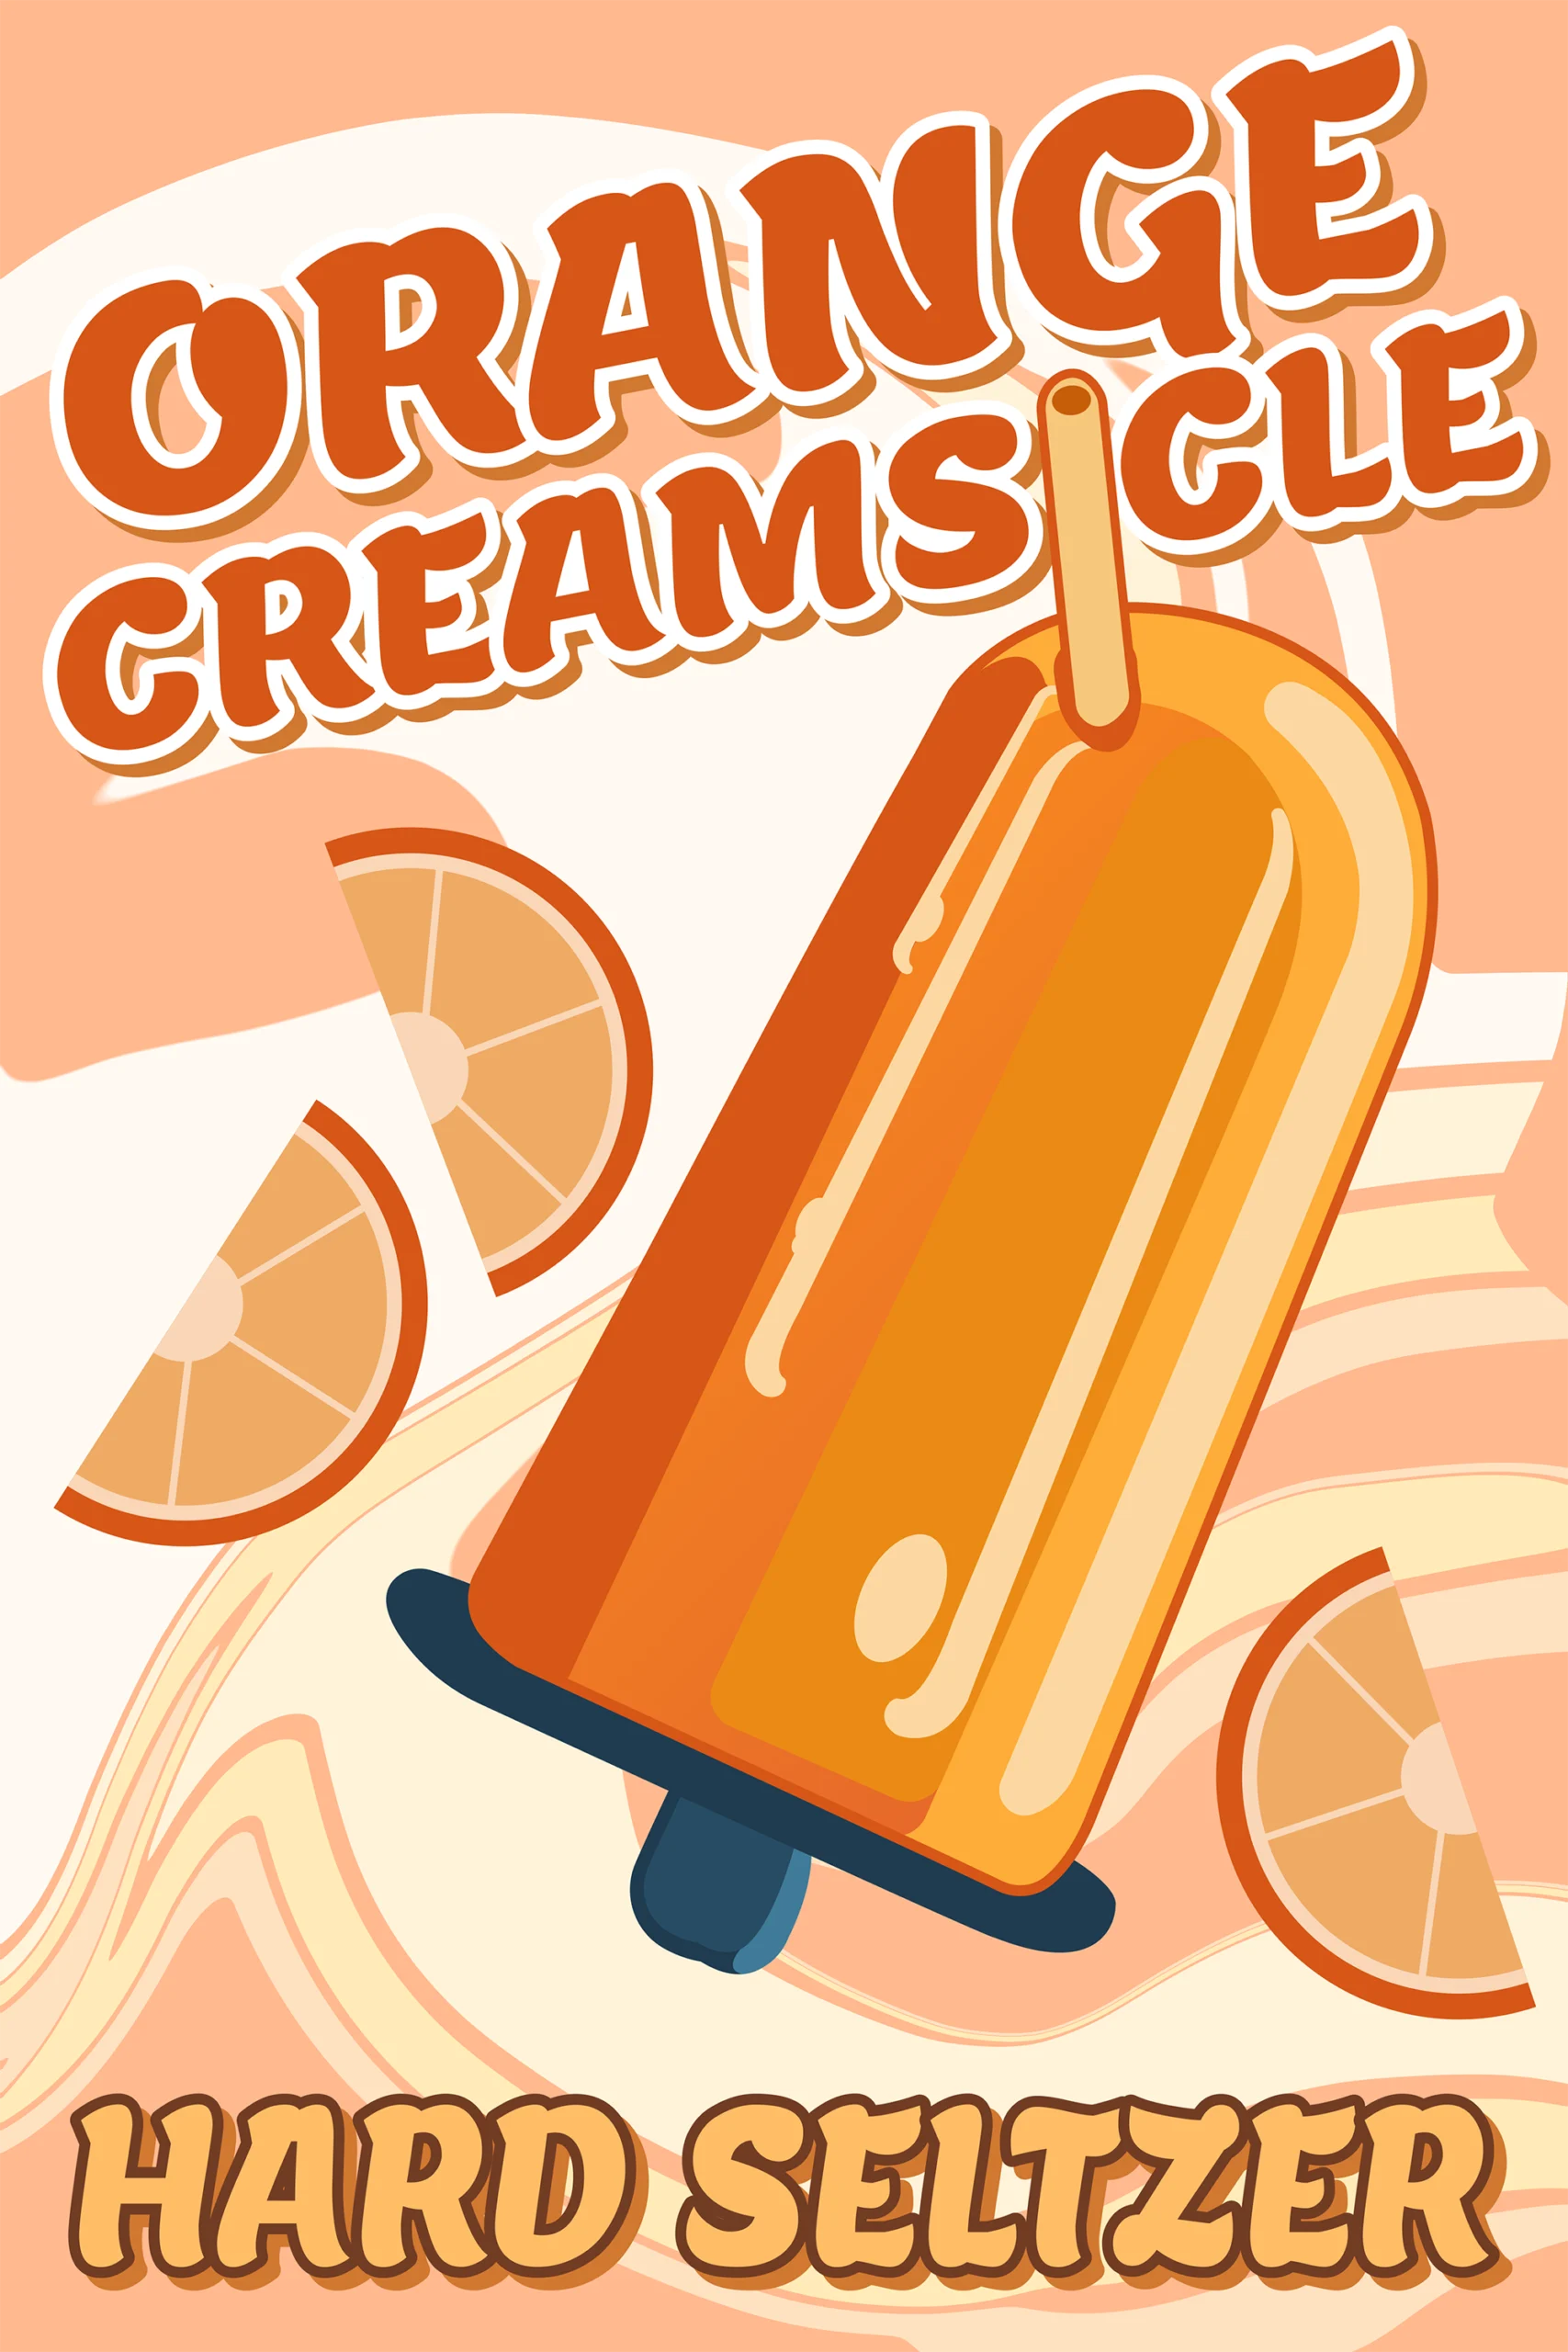 Poster representing the beverage ORANGE CREAMSICLE, a HARD SELTZER with an alcohol content of 5%, available on tap at Transplants Brewing